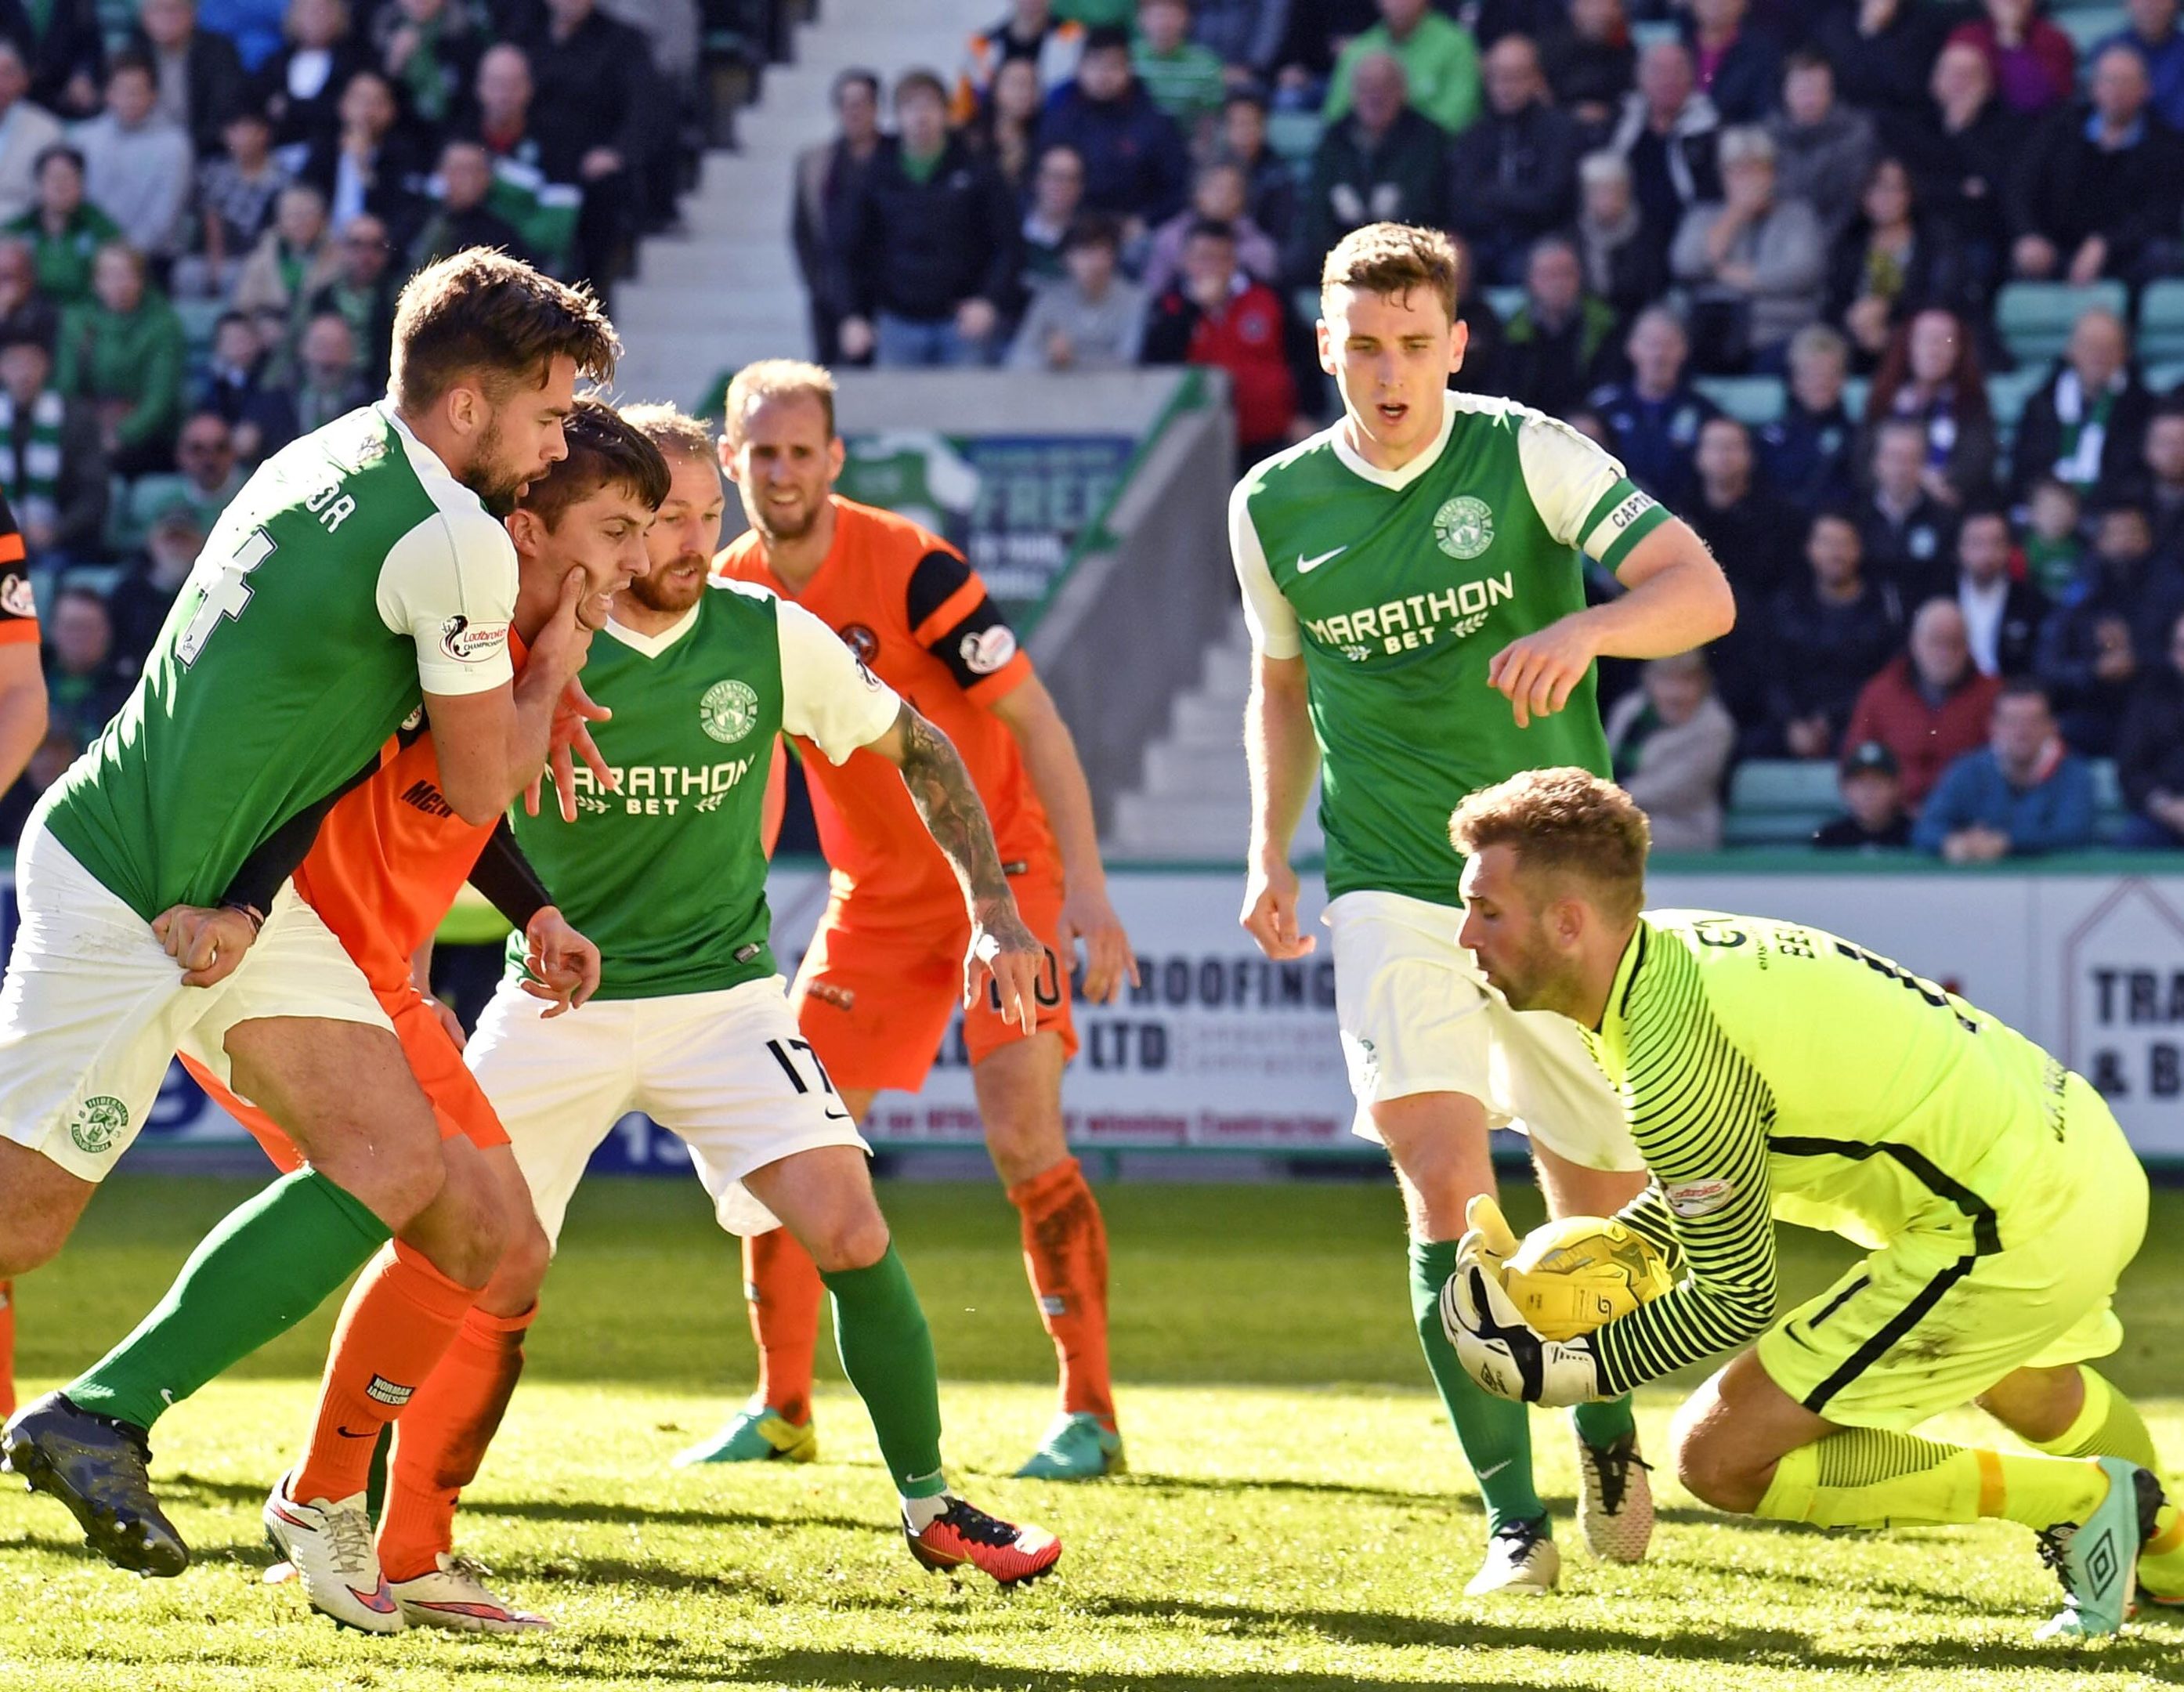 Action from the Hibs game at Easter Road.